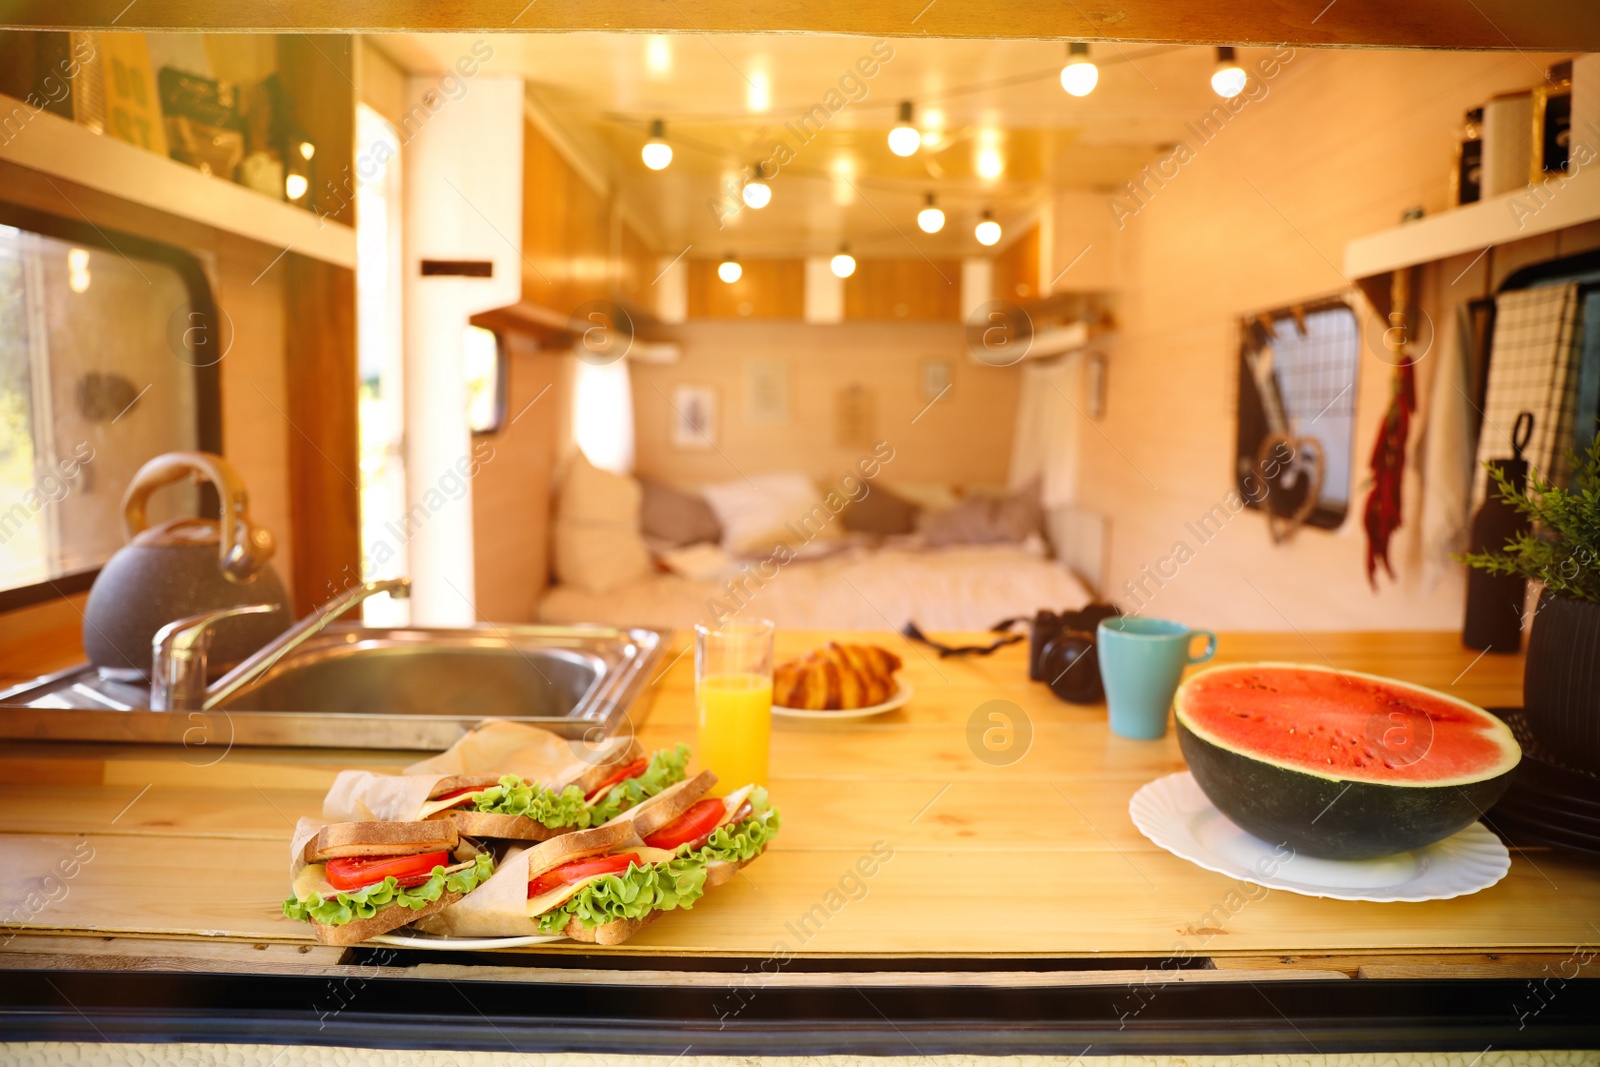 Photo of Delicious sandwiches and watermelon on wooden table in modern trailer. Camping vacation